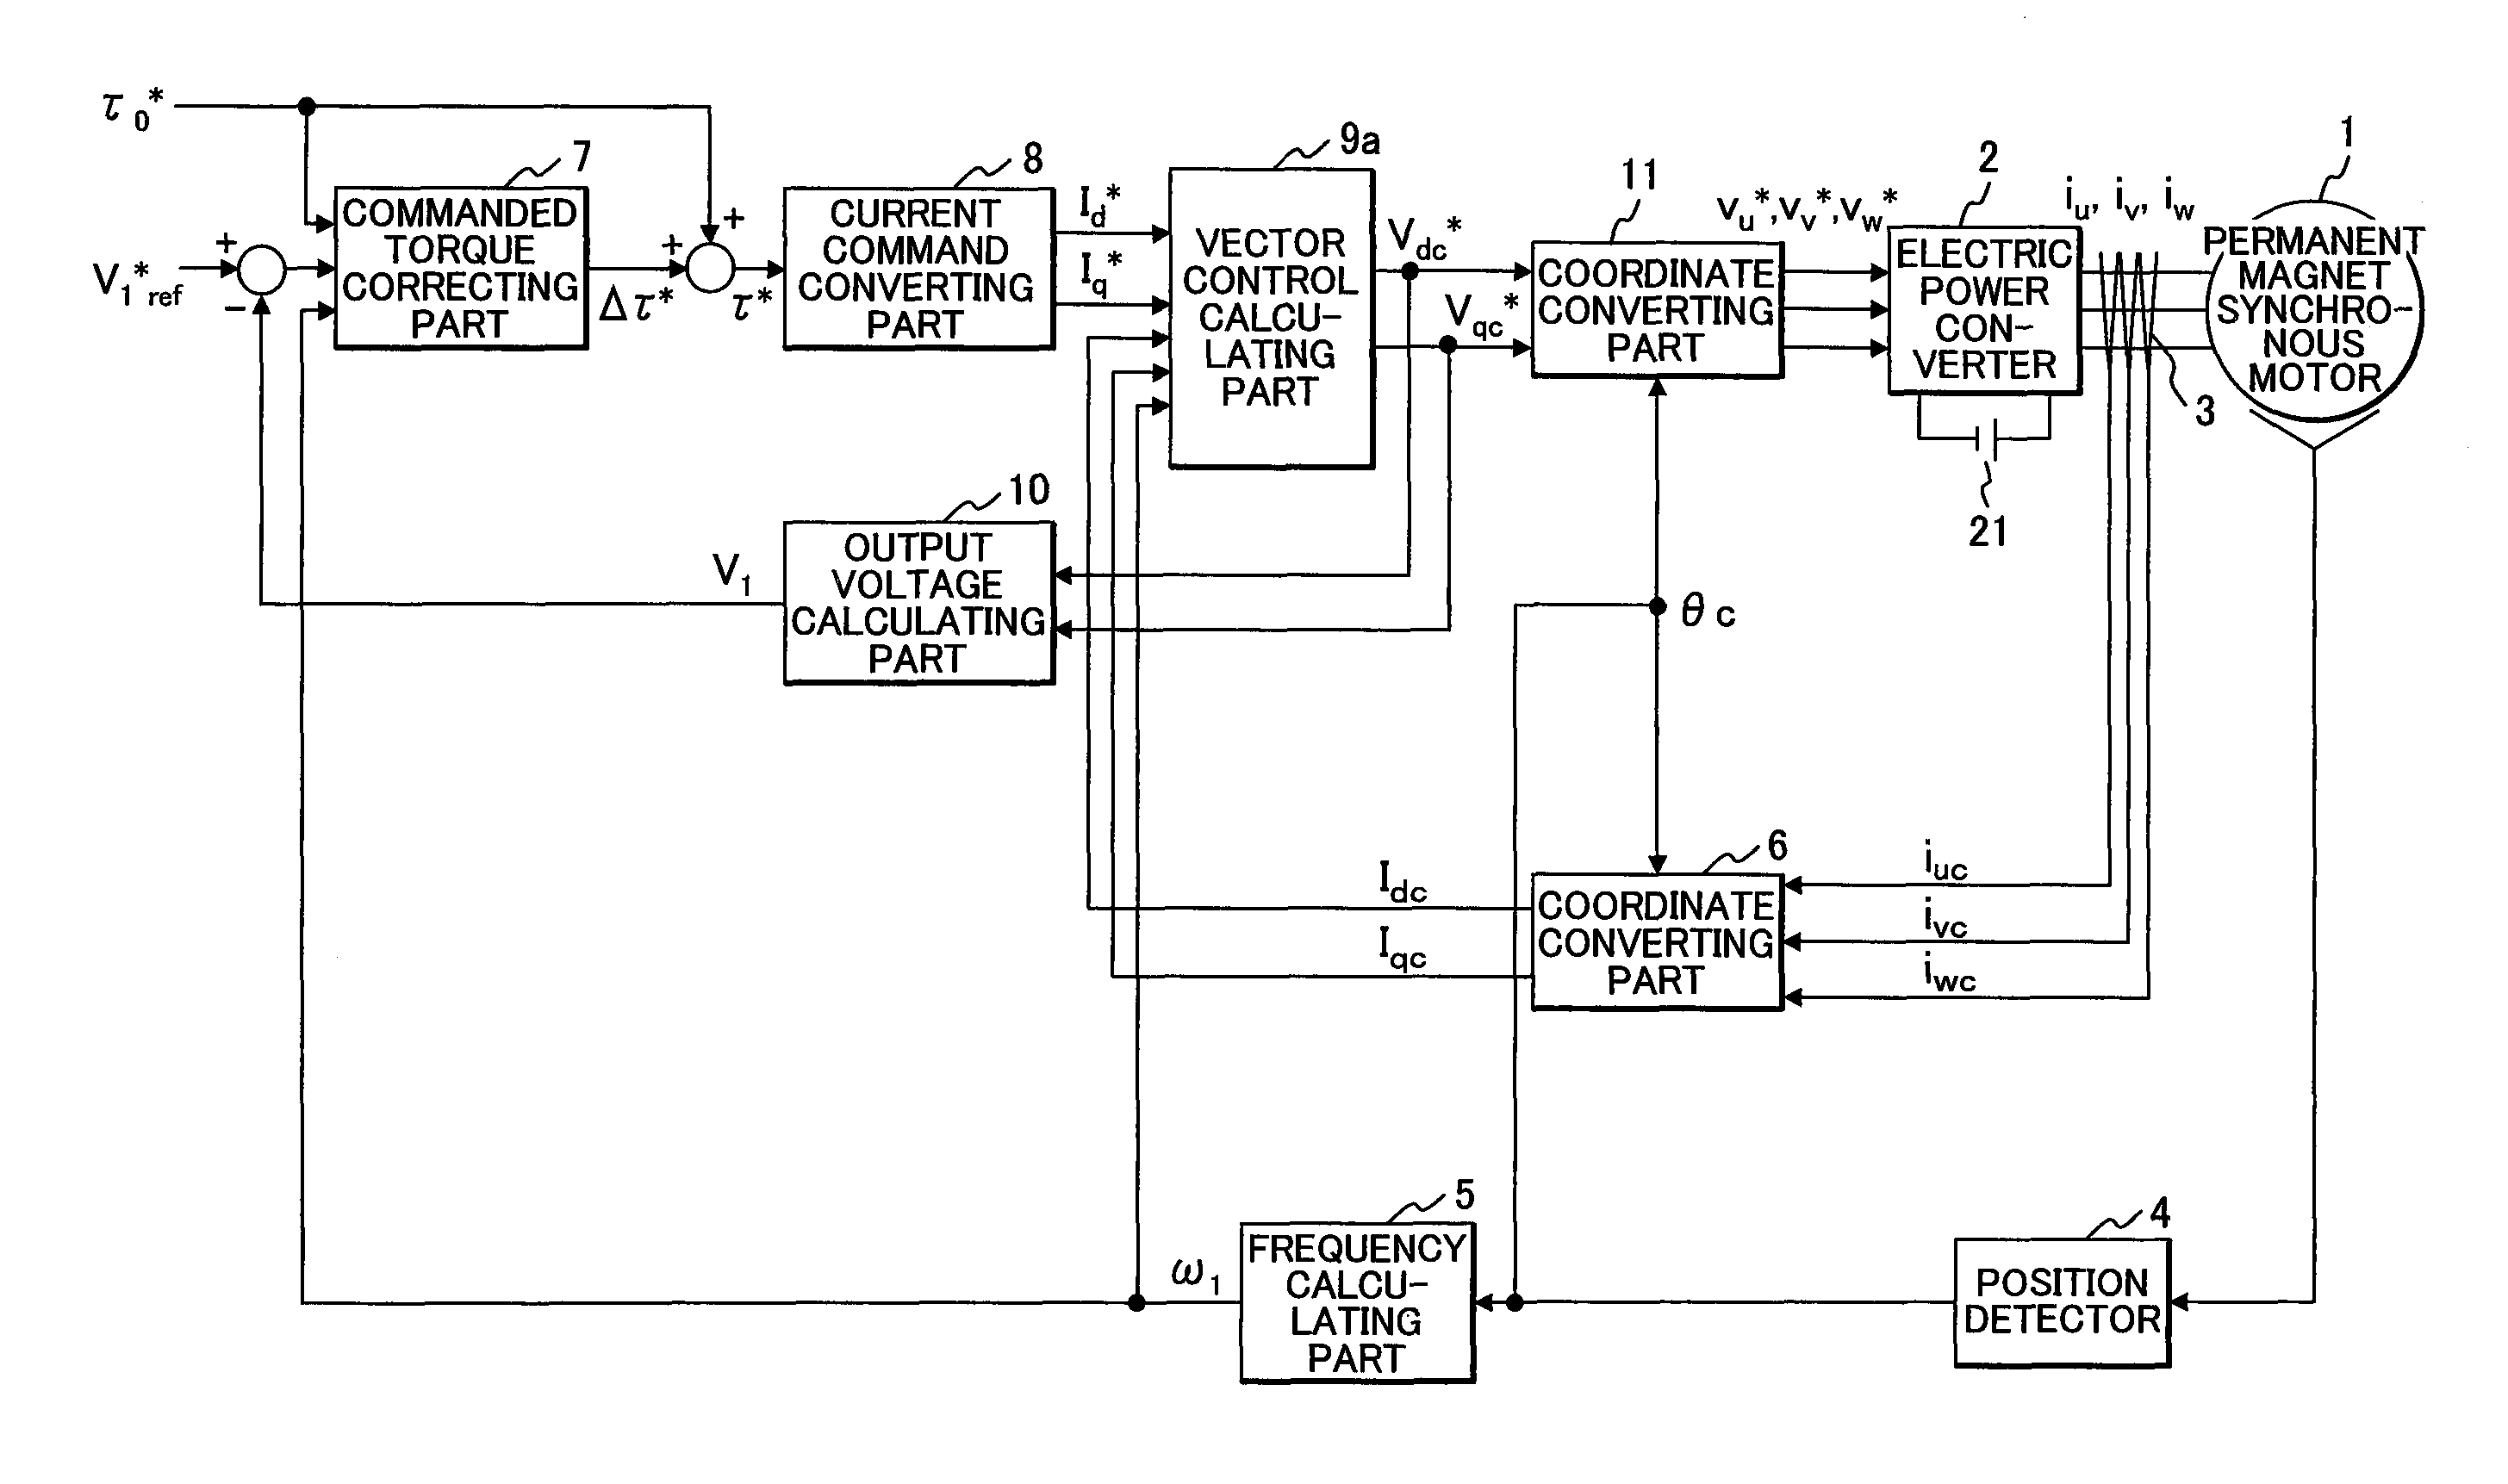 Torque controller for permanent magnet synchronous motor